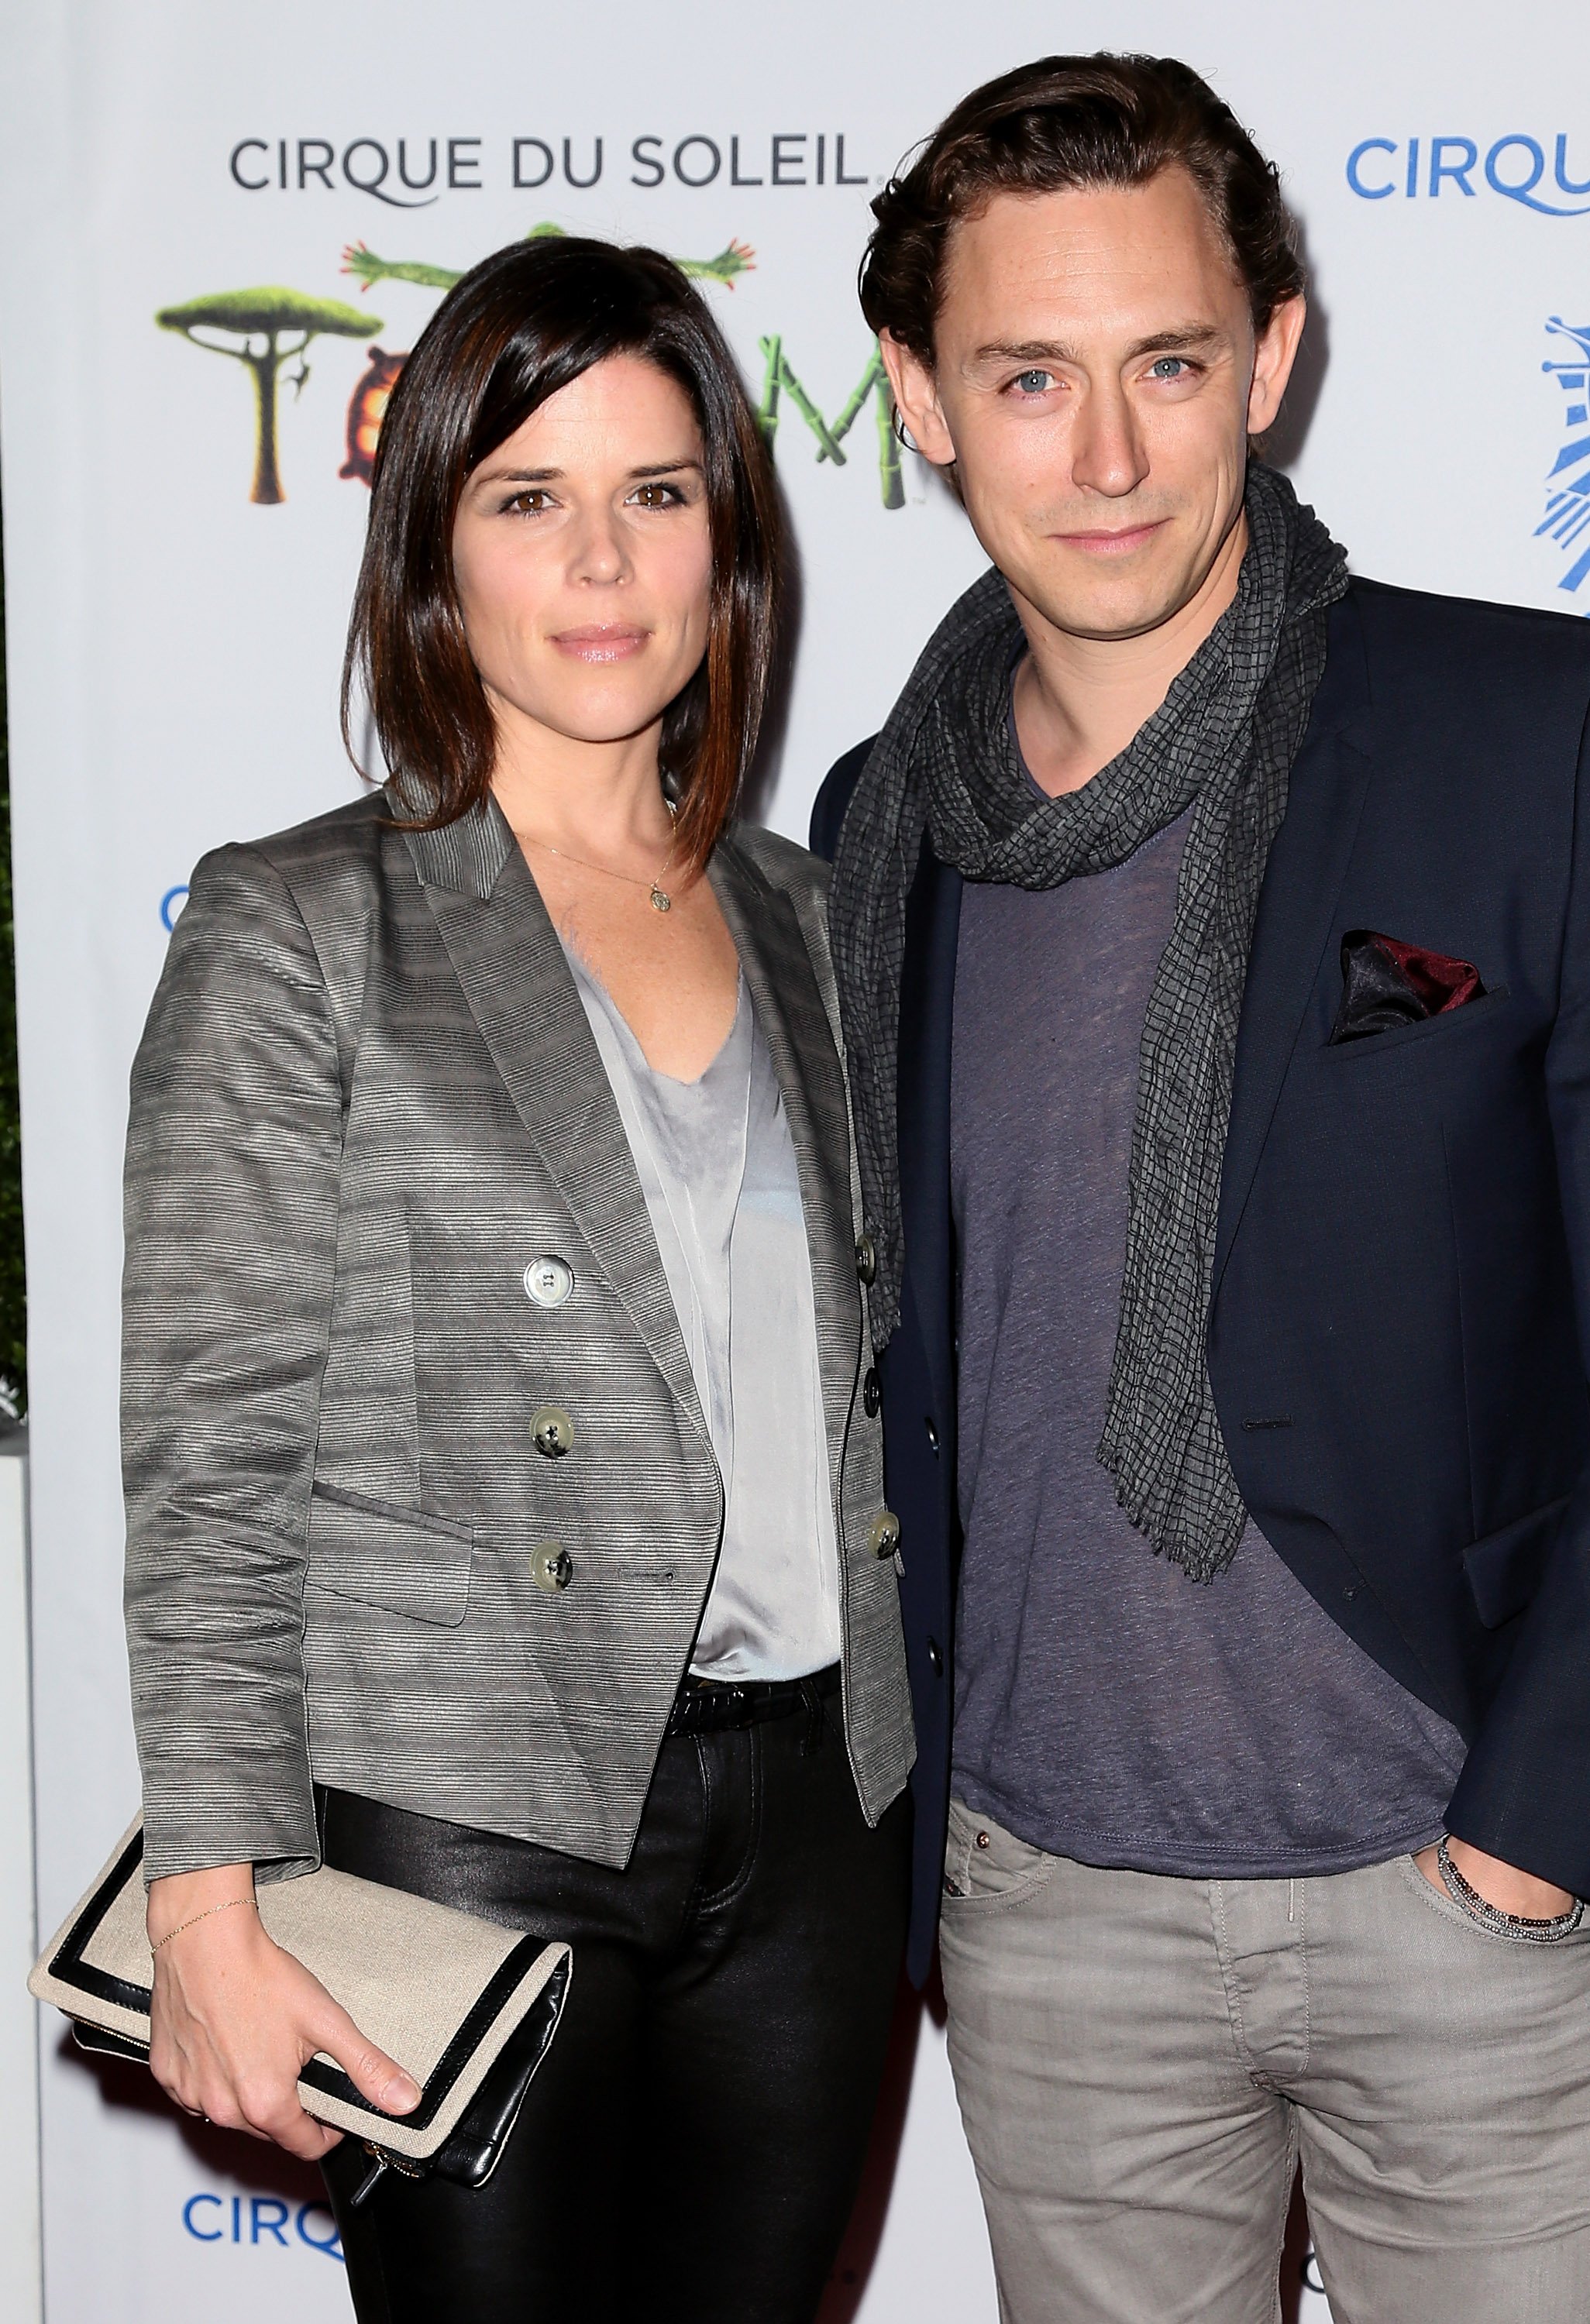 Neve Campbell and JJ Feild attend the opening night of Cirque du Soleil's "Totem" at the Santa Monica Pier on January 21, 2014, in Santa Monica, California. | Source: Getty Images